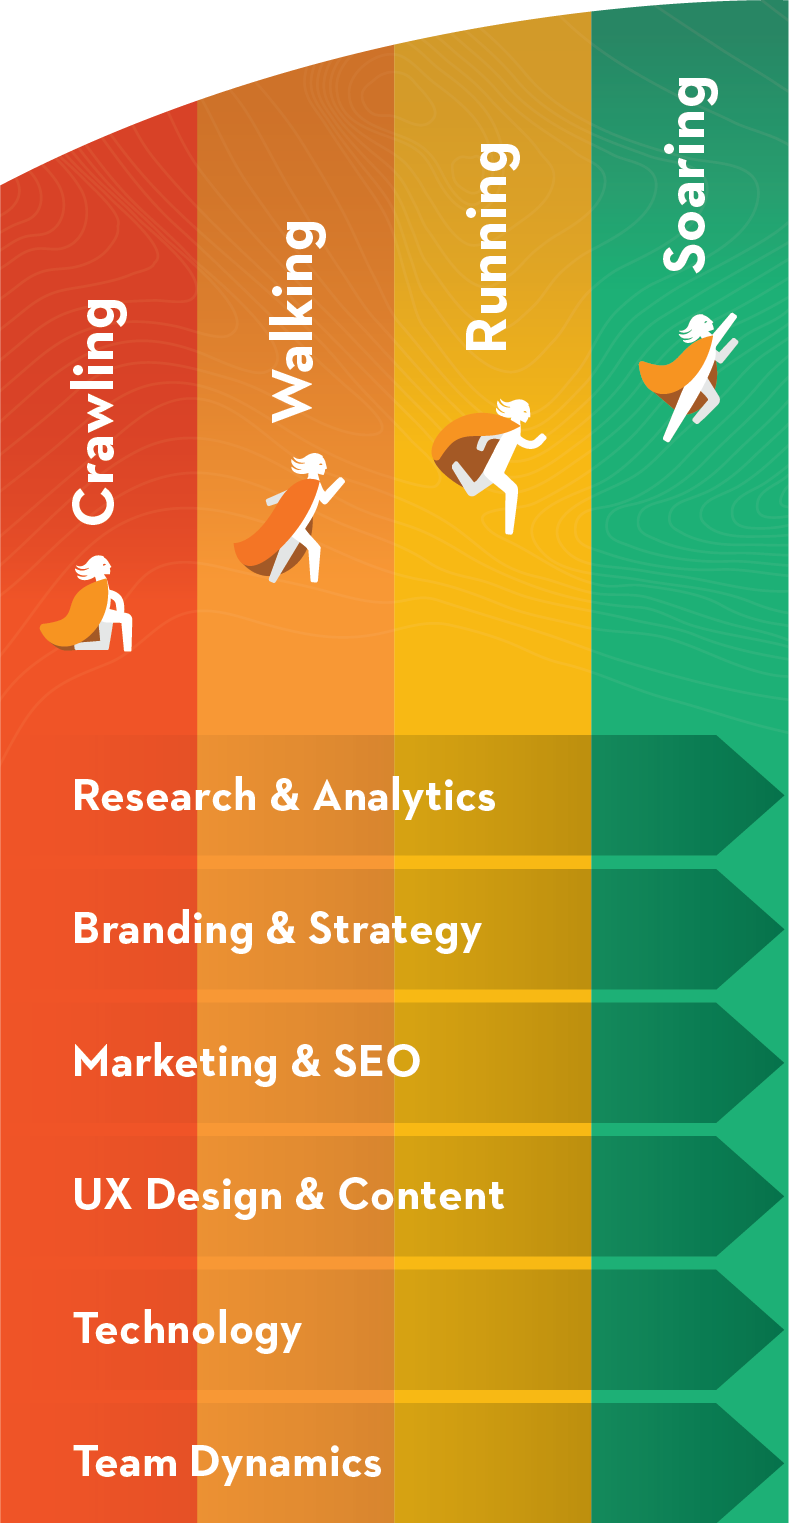 The six categories of marketing maturity include Research & Analytics, Branding & Strategy, Marketing & SEO, UX Design & Content, Technology, and Team Dynamics. Combined, these categories place you in a marketing maturity stage of either Crawling, Walking, Running or Soaring.